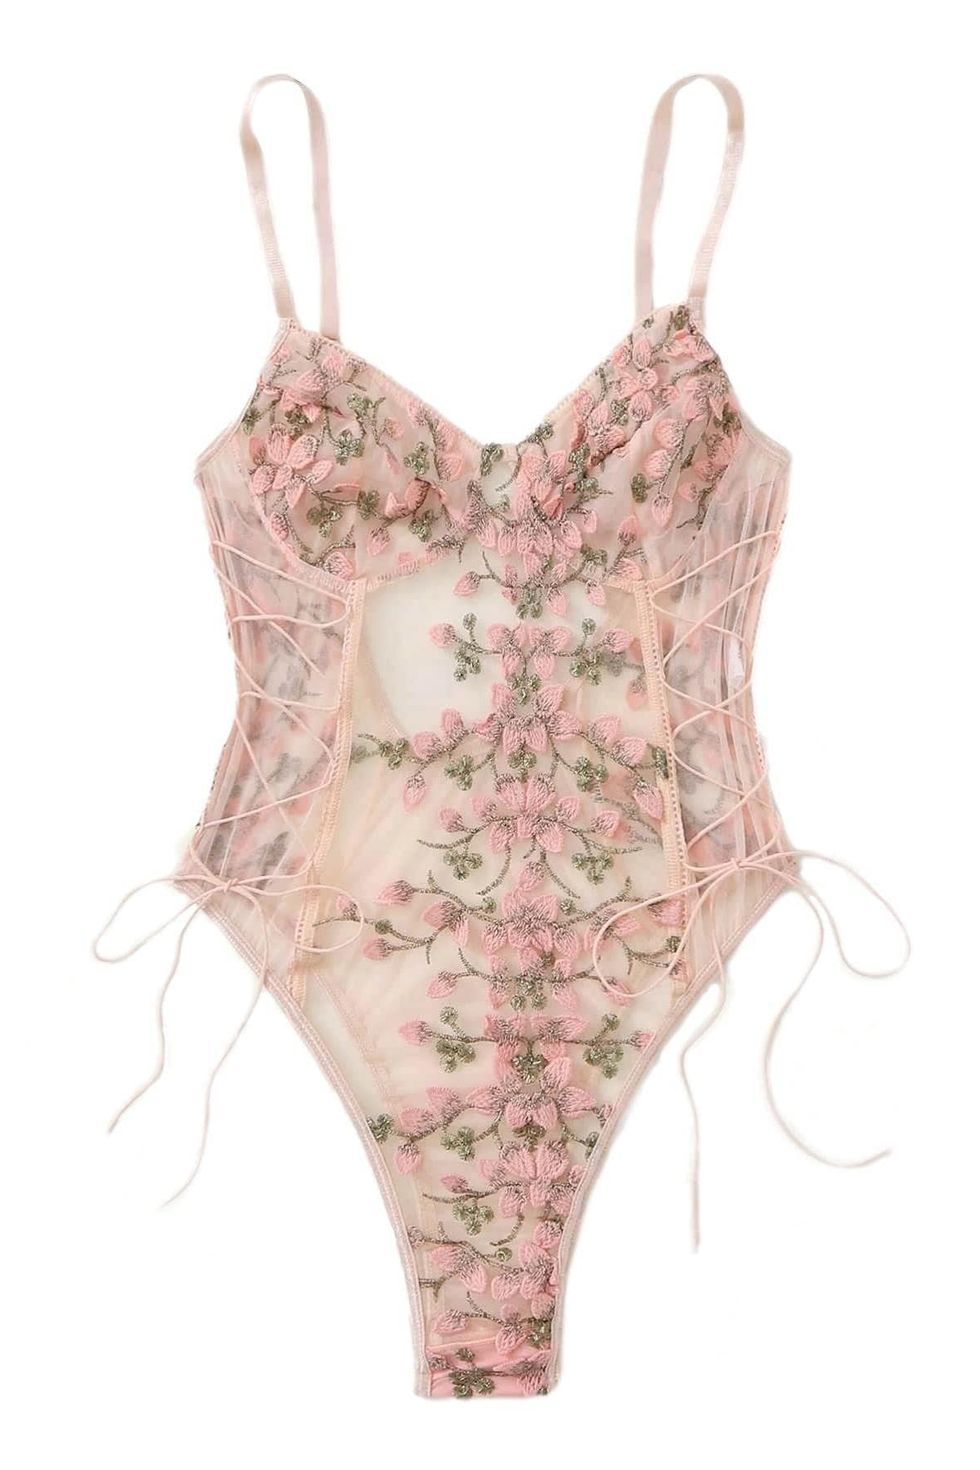 Lilosy Lace Up Floral Embroidered Lingerie Bodysuit